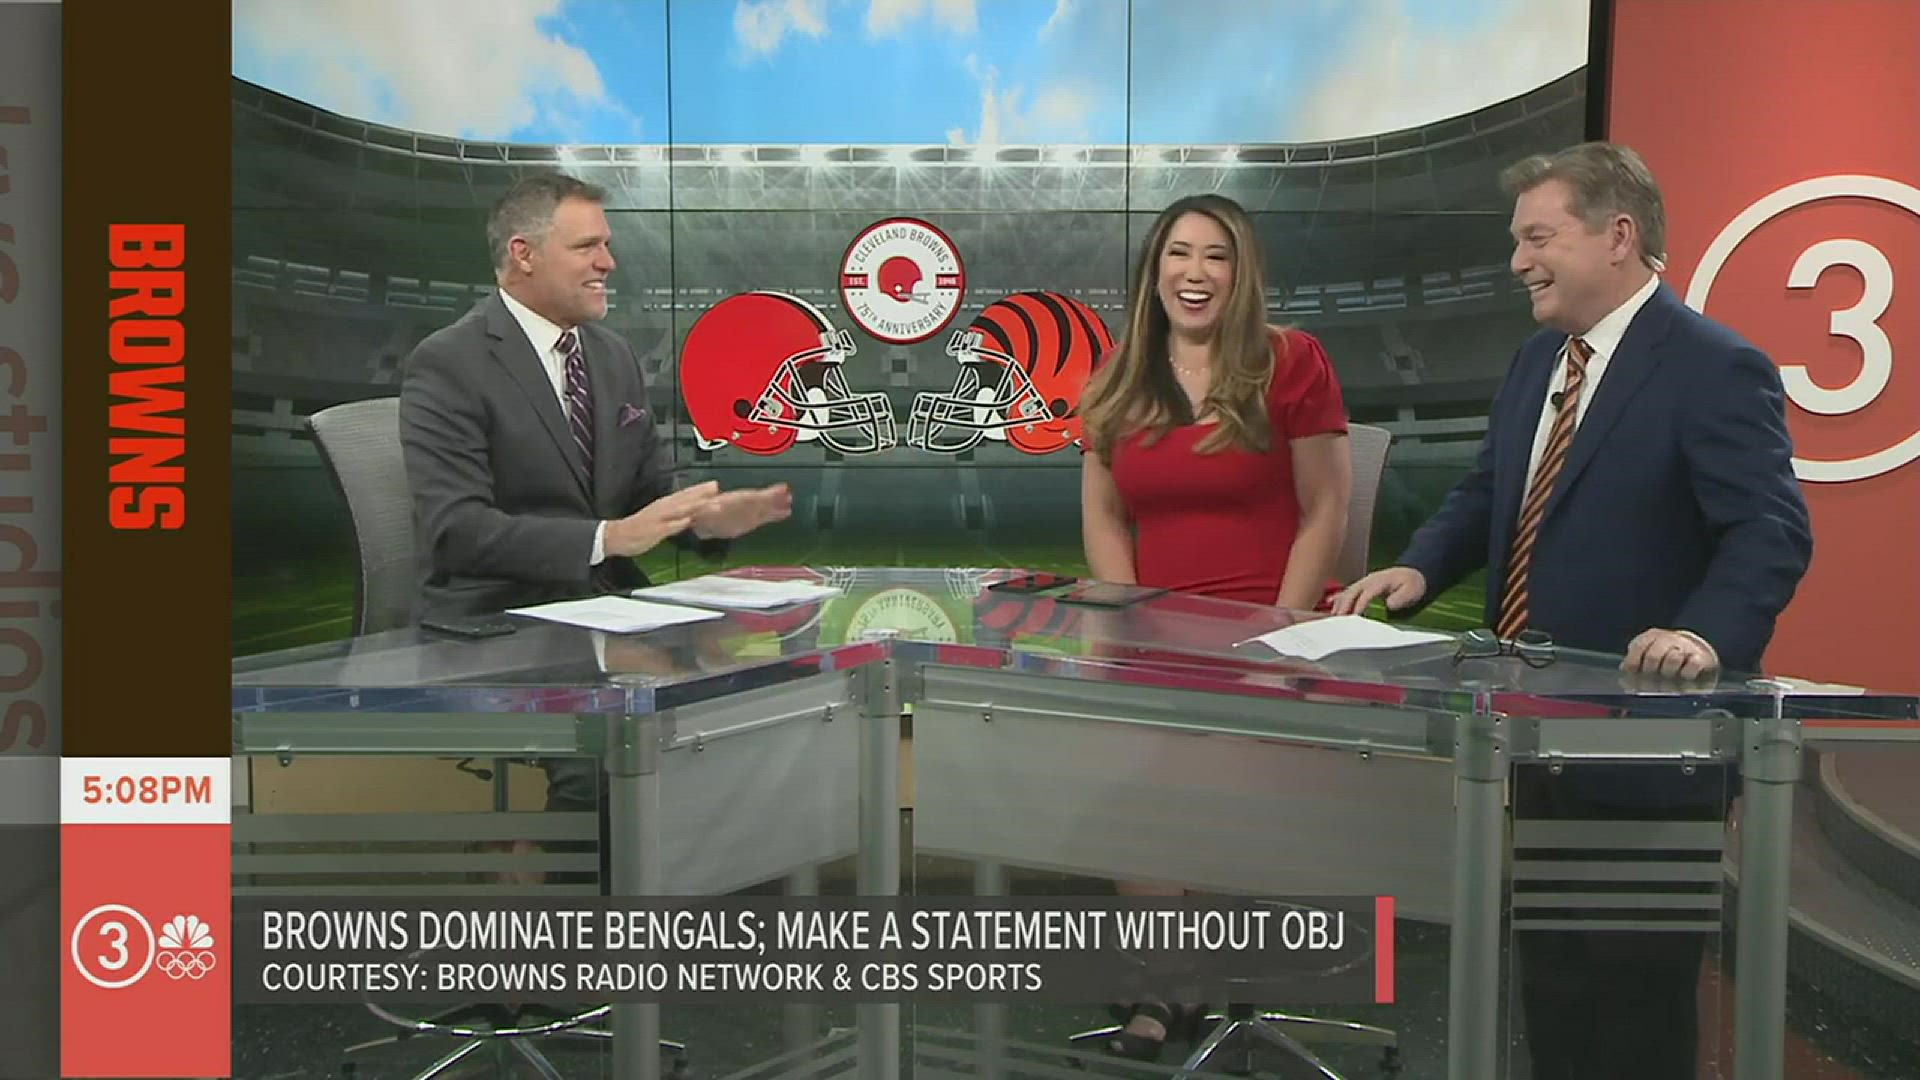 The Browns picked up a crucial win on Sunday in Cincinnati as they beat the Bengals, 41-16. Jim Donovan joined Jay Crawford and Lynna Lai for reaction on What's New.